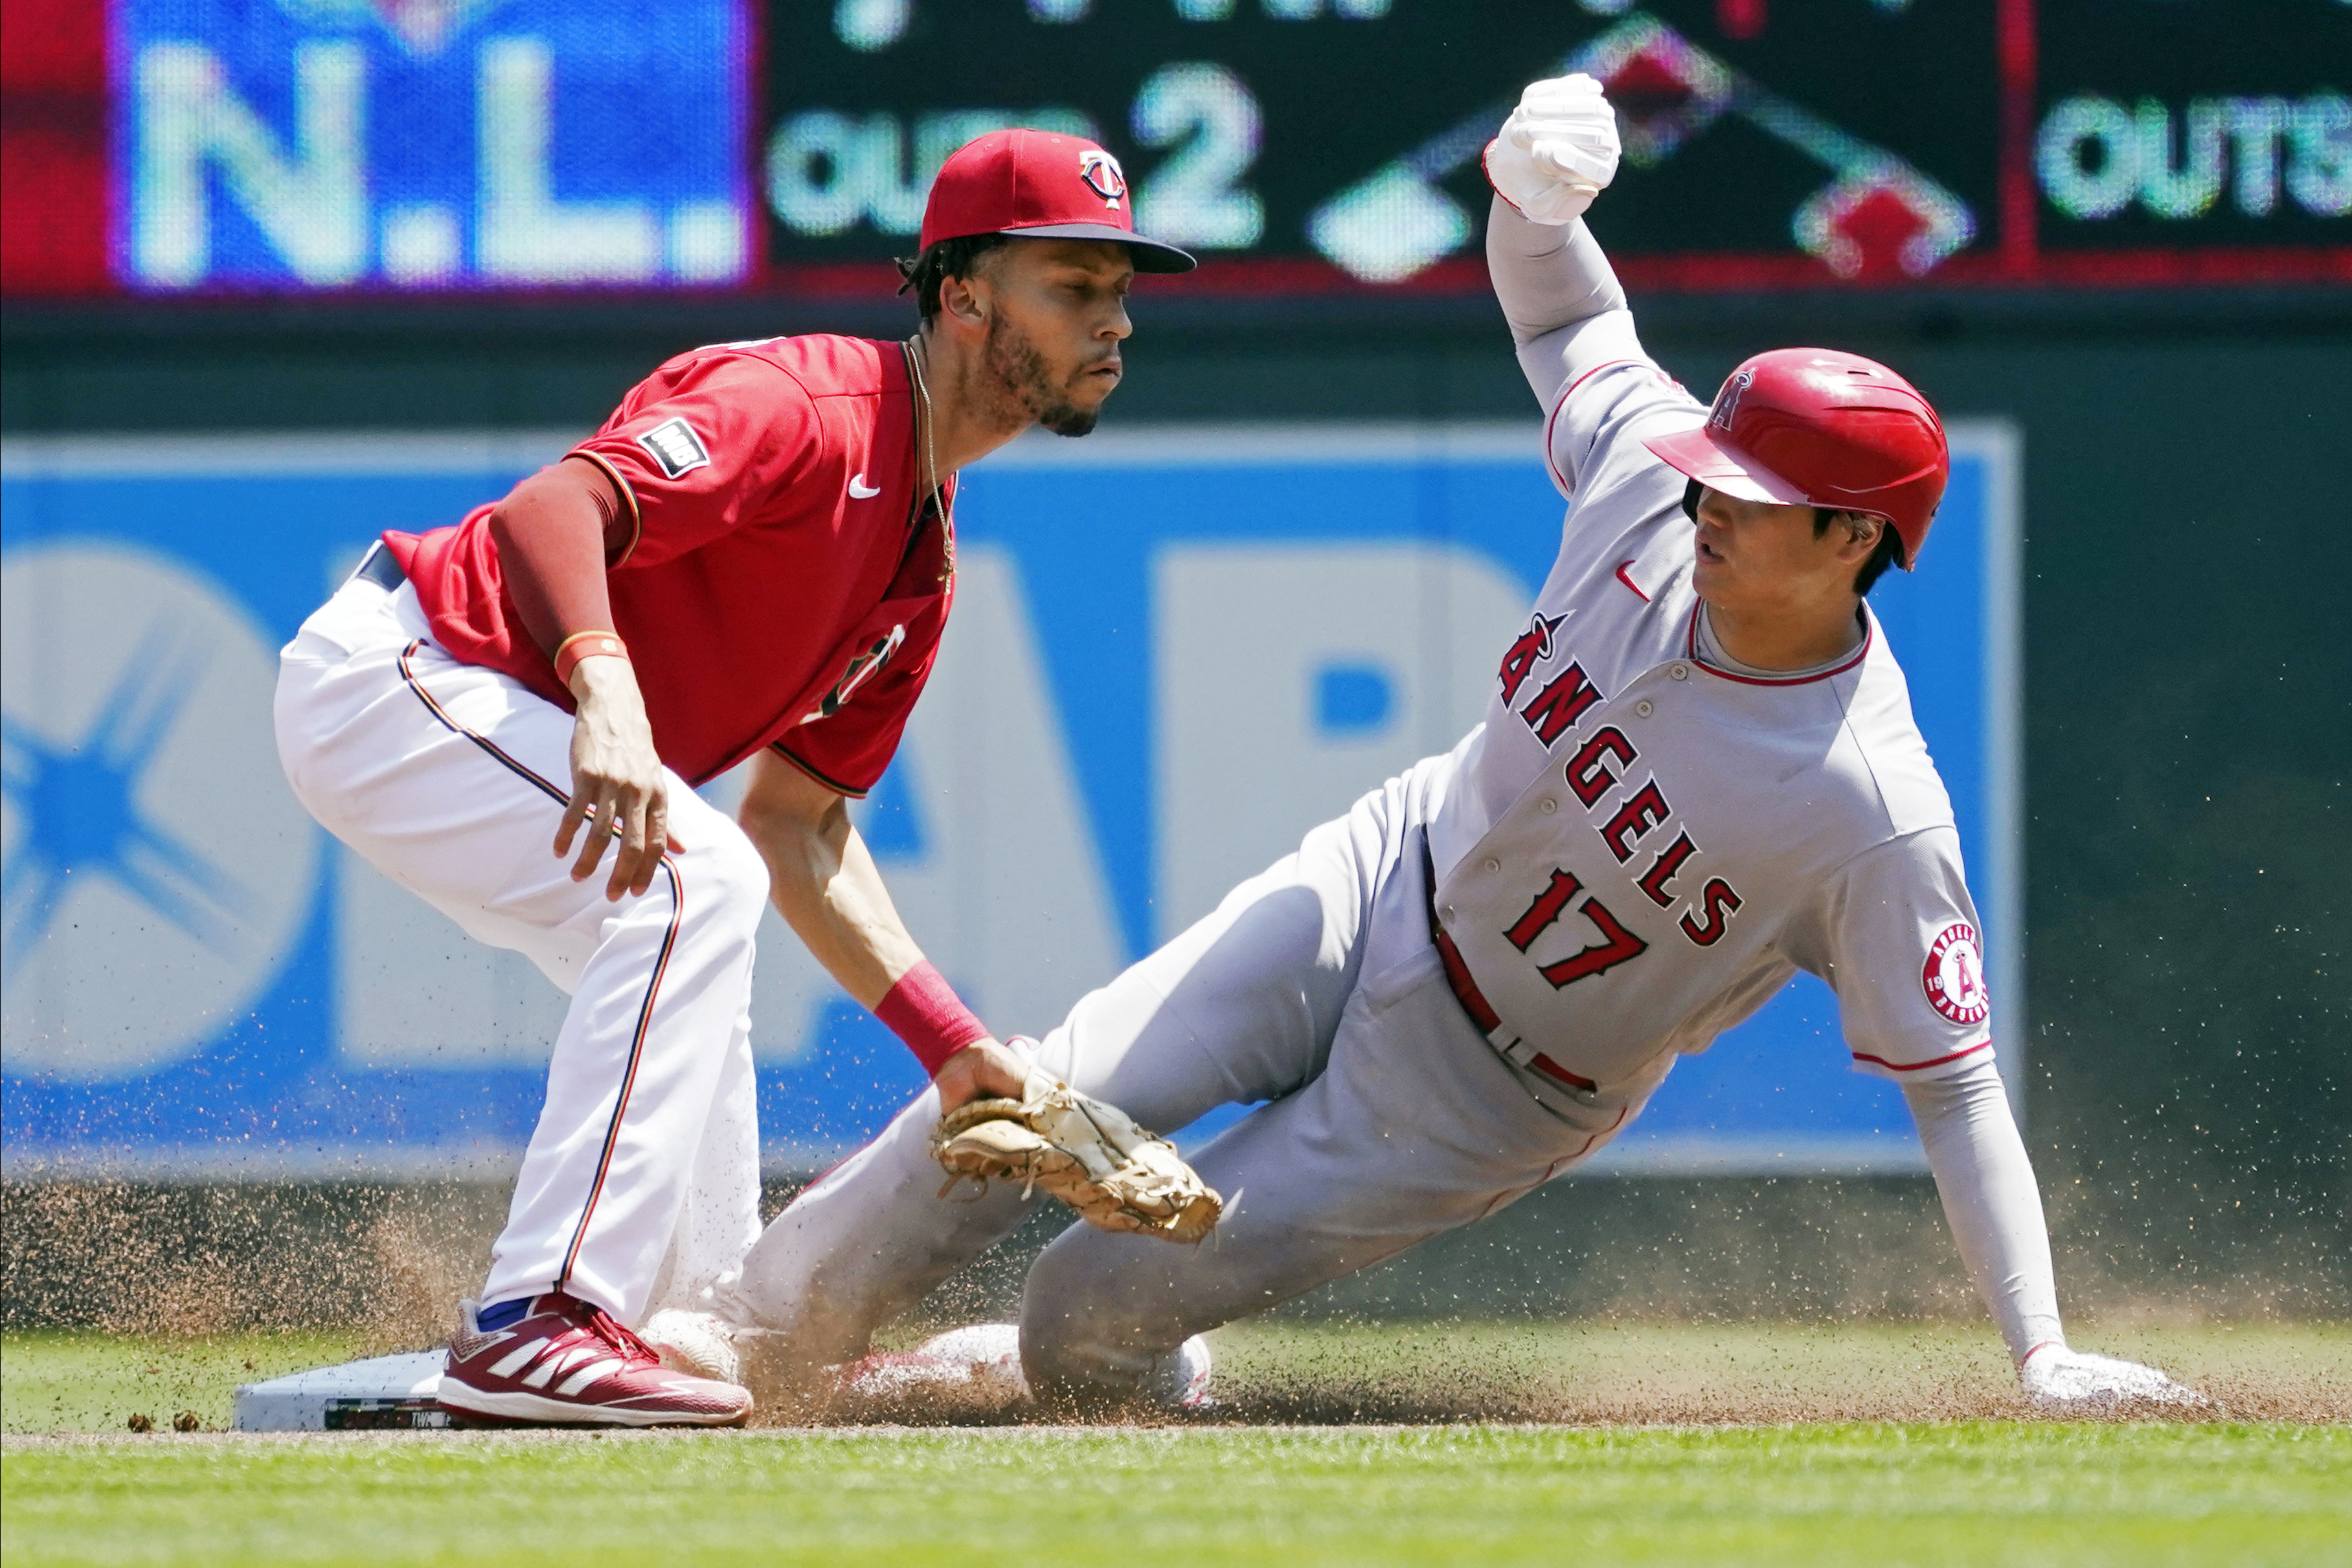 Shohei Ohtani's two-run homer lifts Angels over Red Sox in series